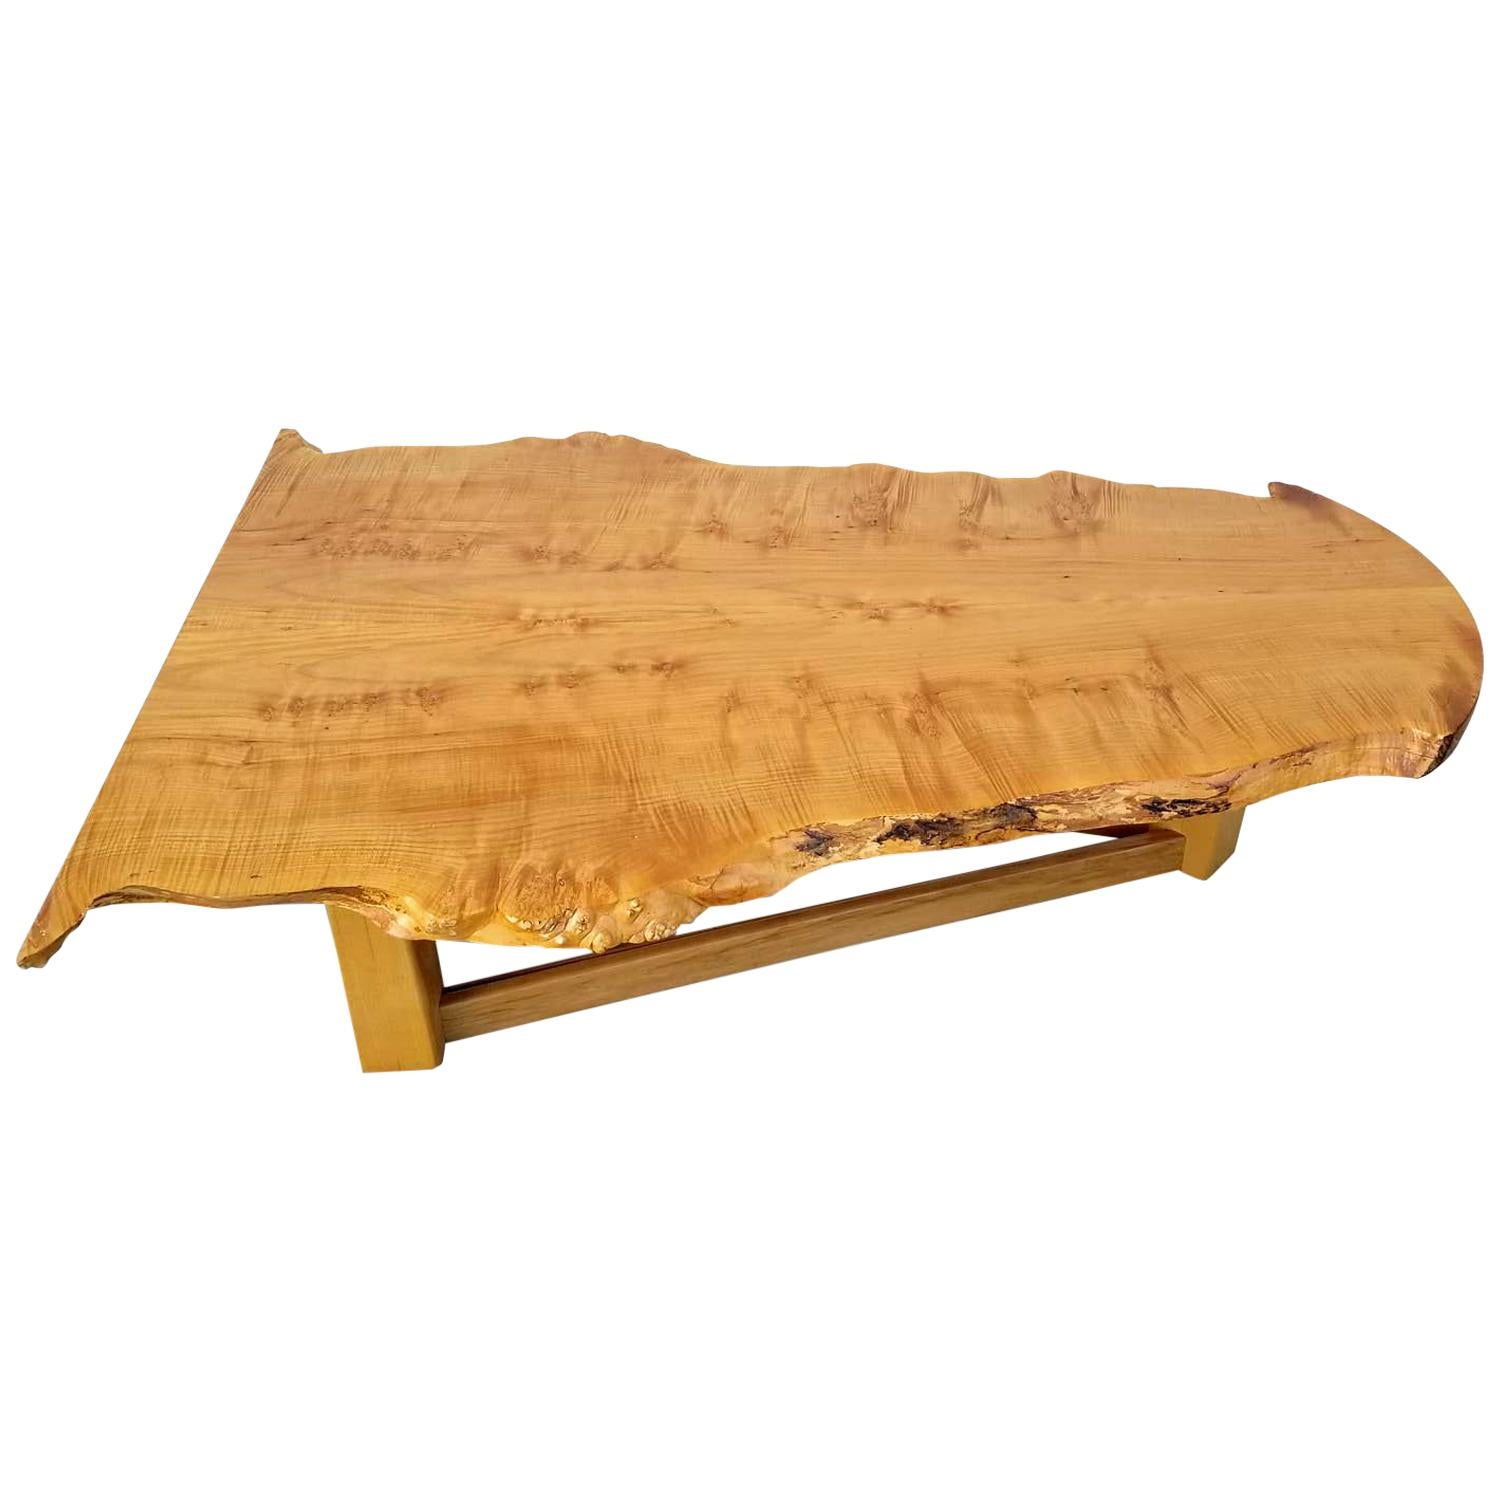 Exceptional bird's-eye maple slab coffee table with natural live edge. This table caught our eye for it's distinctly modern spin on they typical rustic slab. Notice how the top surface has been expertly milled to have a perfect plane. The millwork